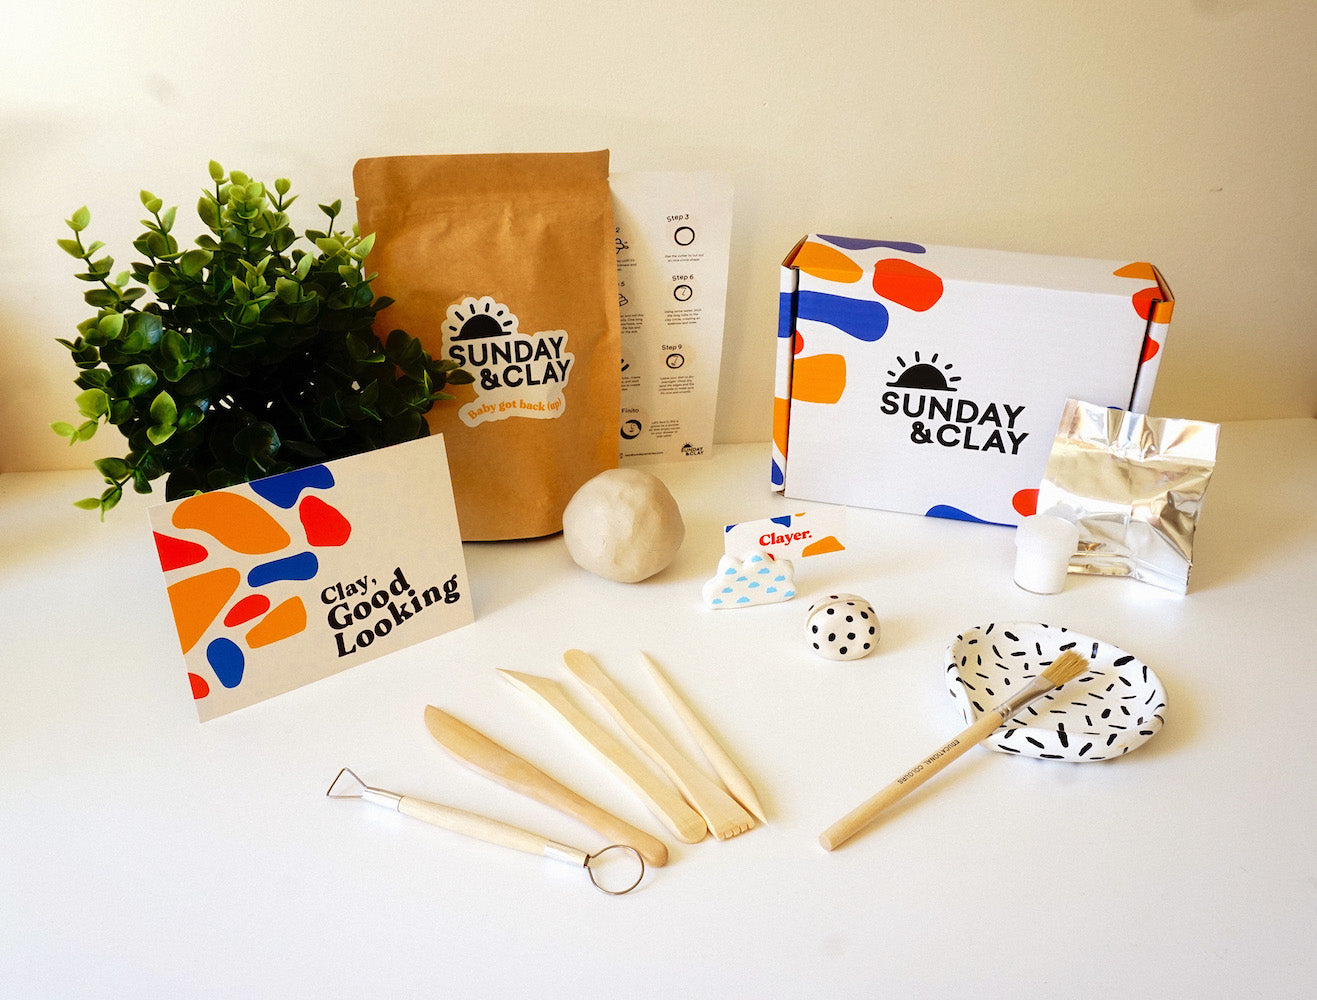 What's included in our DIY Home Clay Kit - The S&C Mini Kit edition including: 250g air dry clay, clay tools, paintbrush, glaze, instructions, and some extra goodies too!